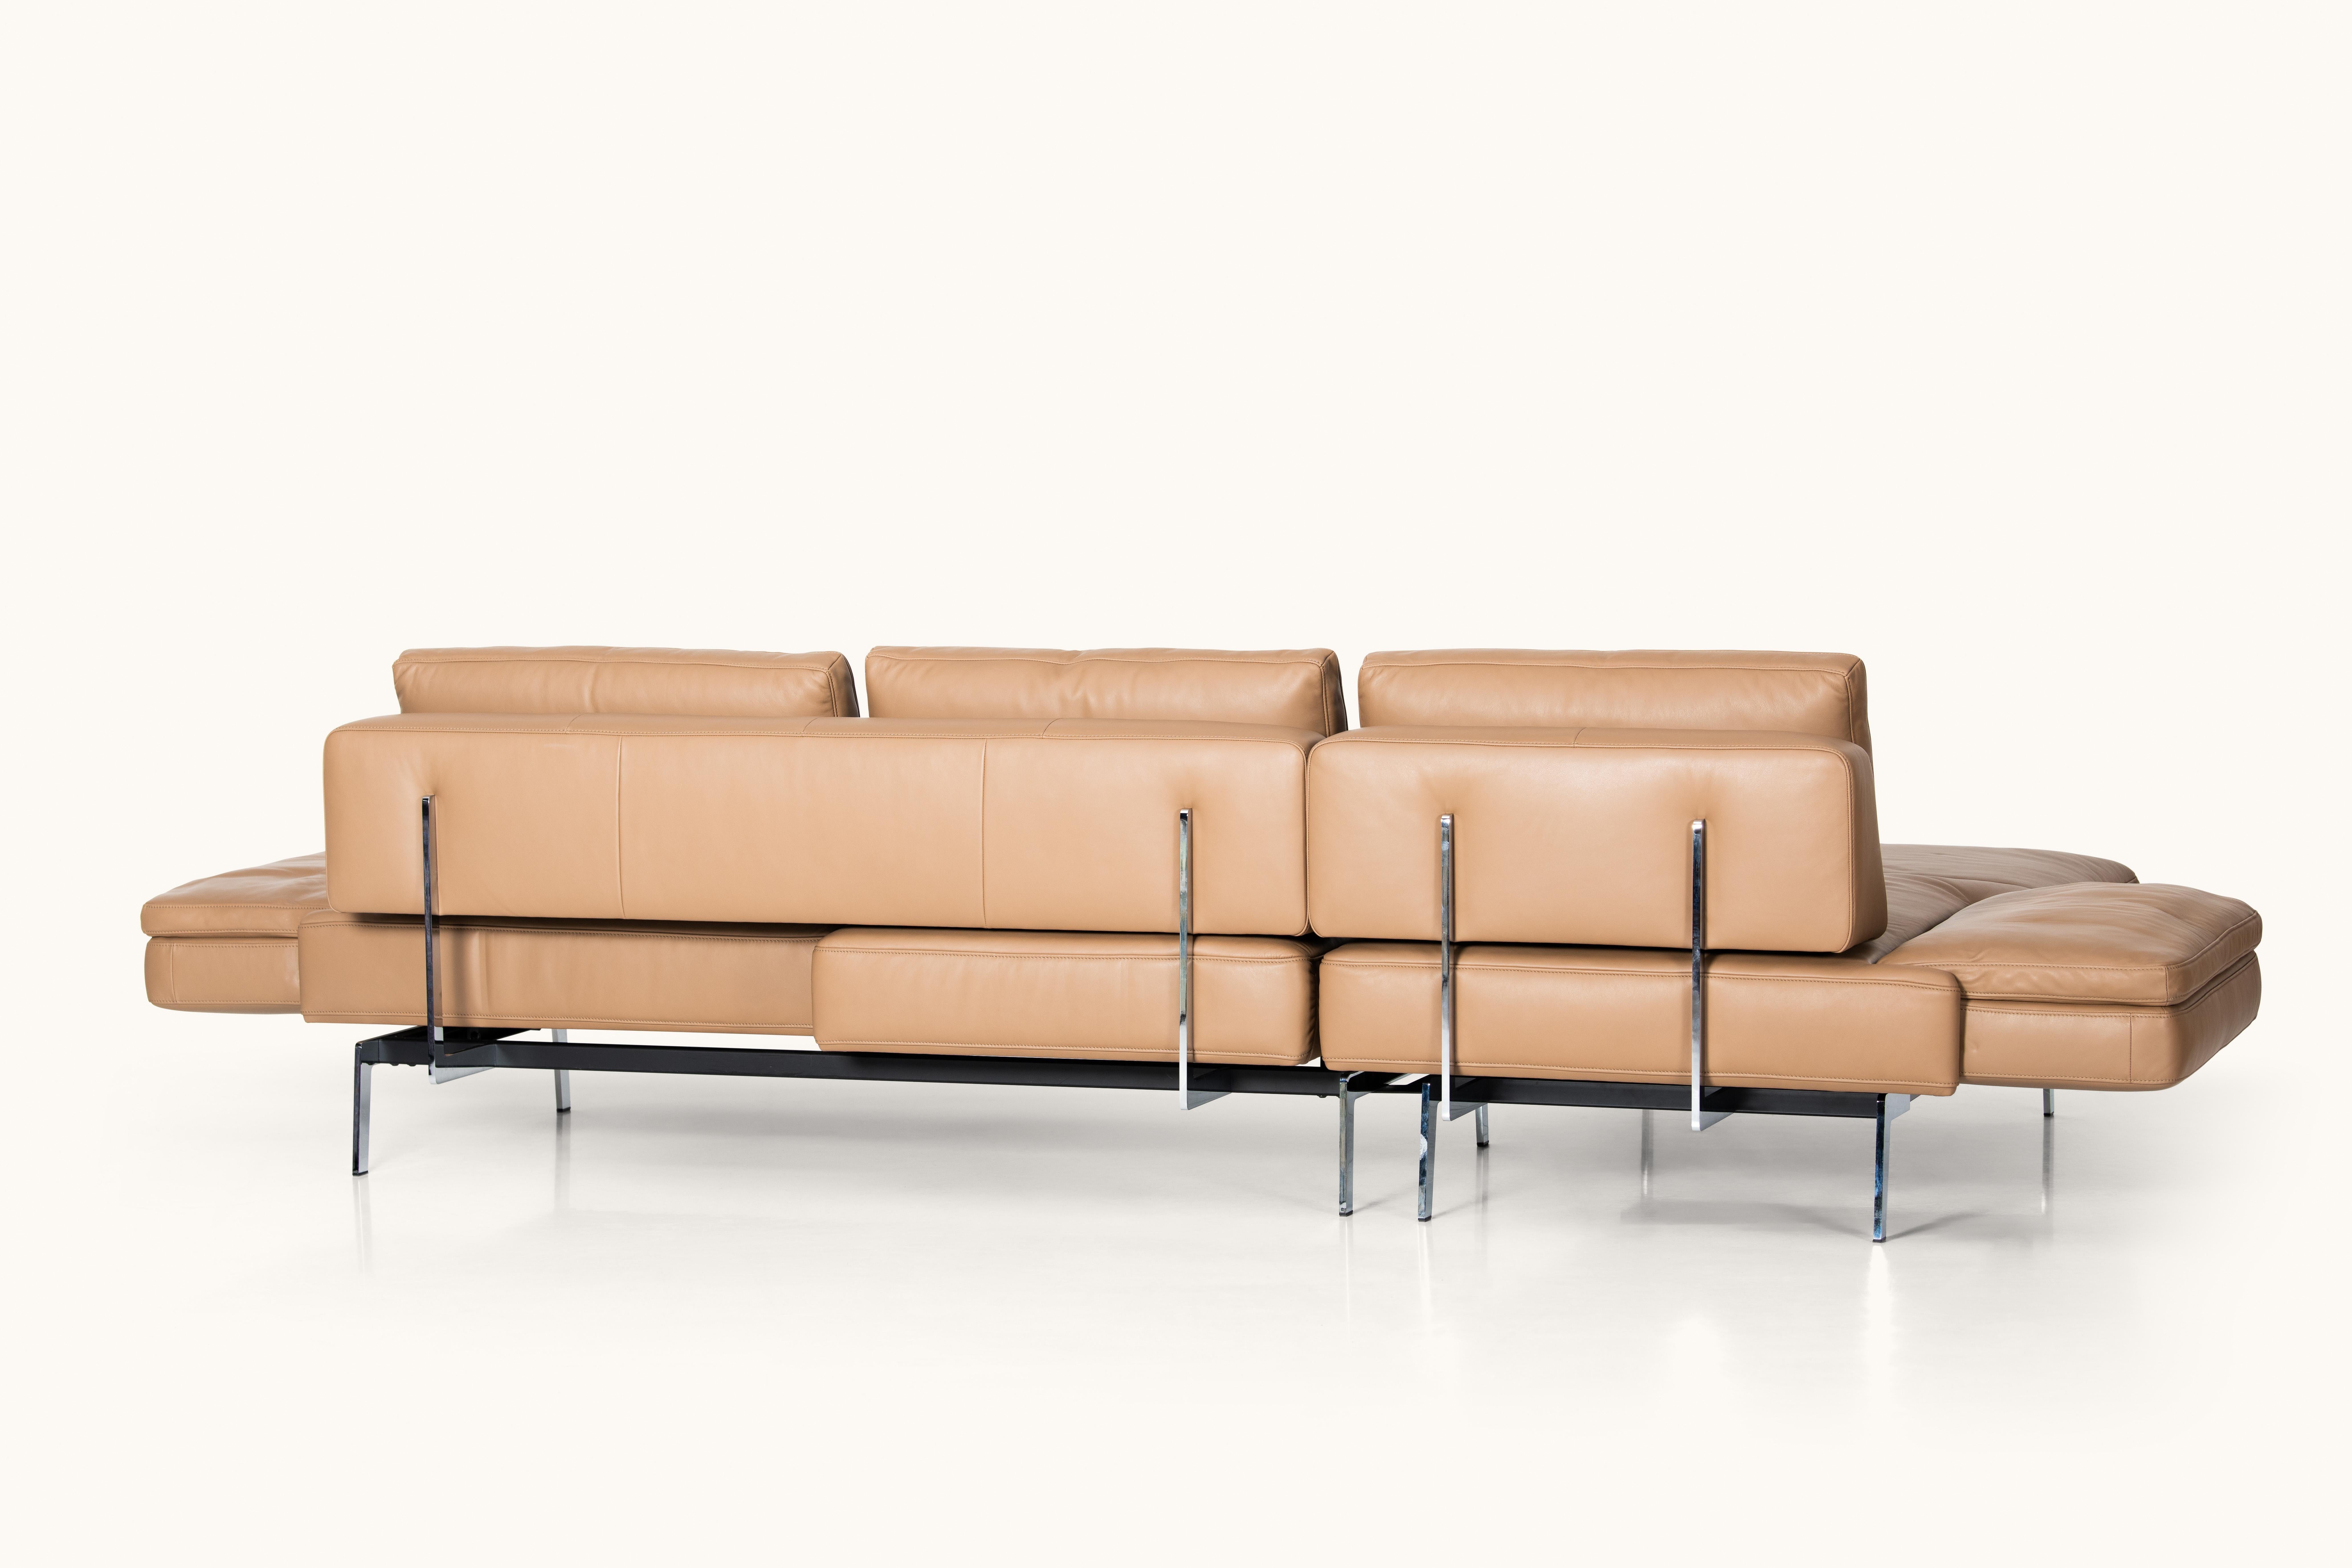 Modern De Sede DS-747/20 Multifunctional Sofa in Noce Leather Seat and Back Upholstery For Sale